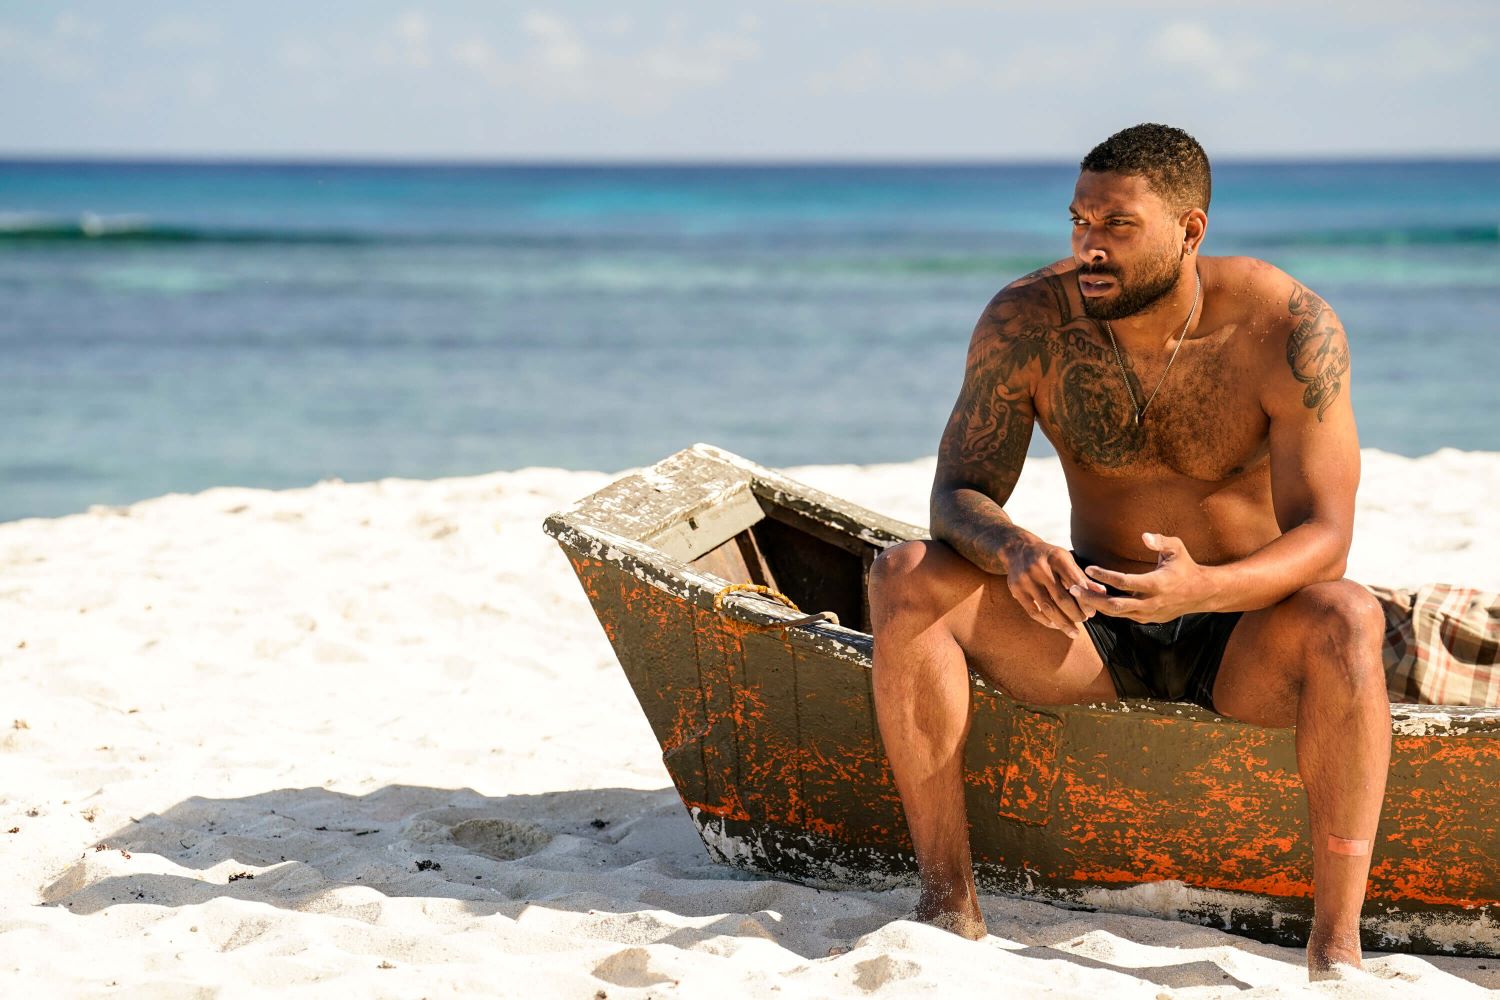 Brandon Cottom, who is competing in 'Survivor' Season 44 on CBS, wears black shorts while sitting on a small boat on the beach.